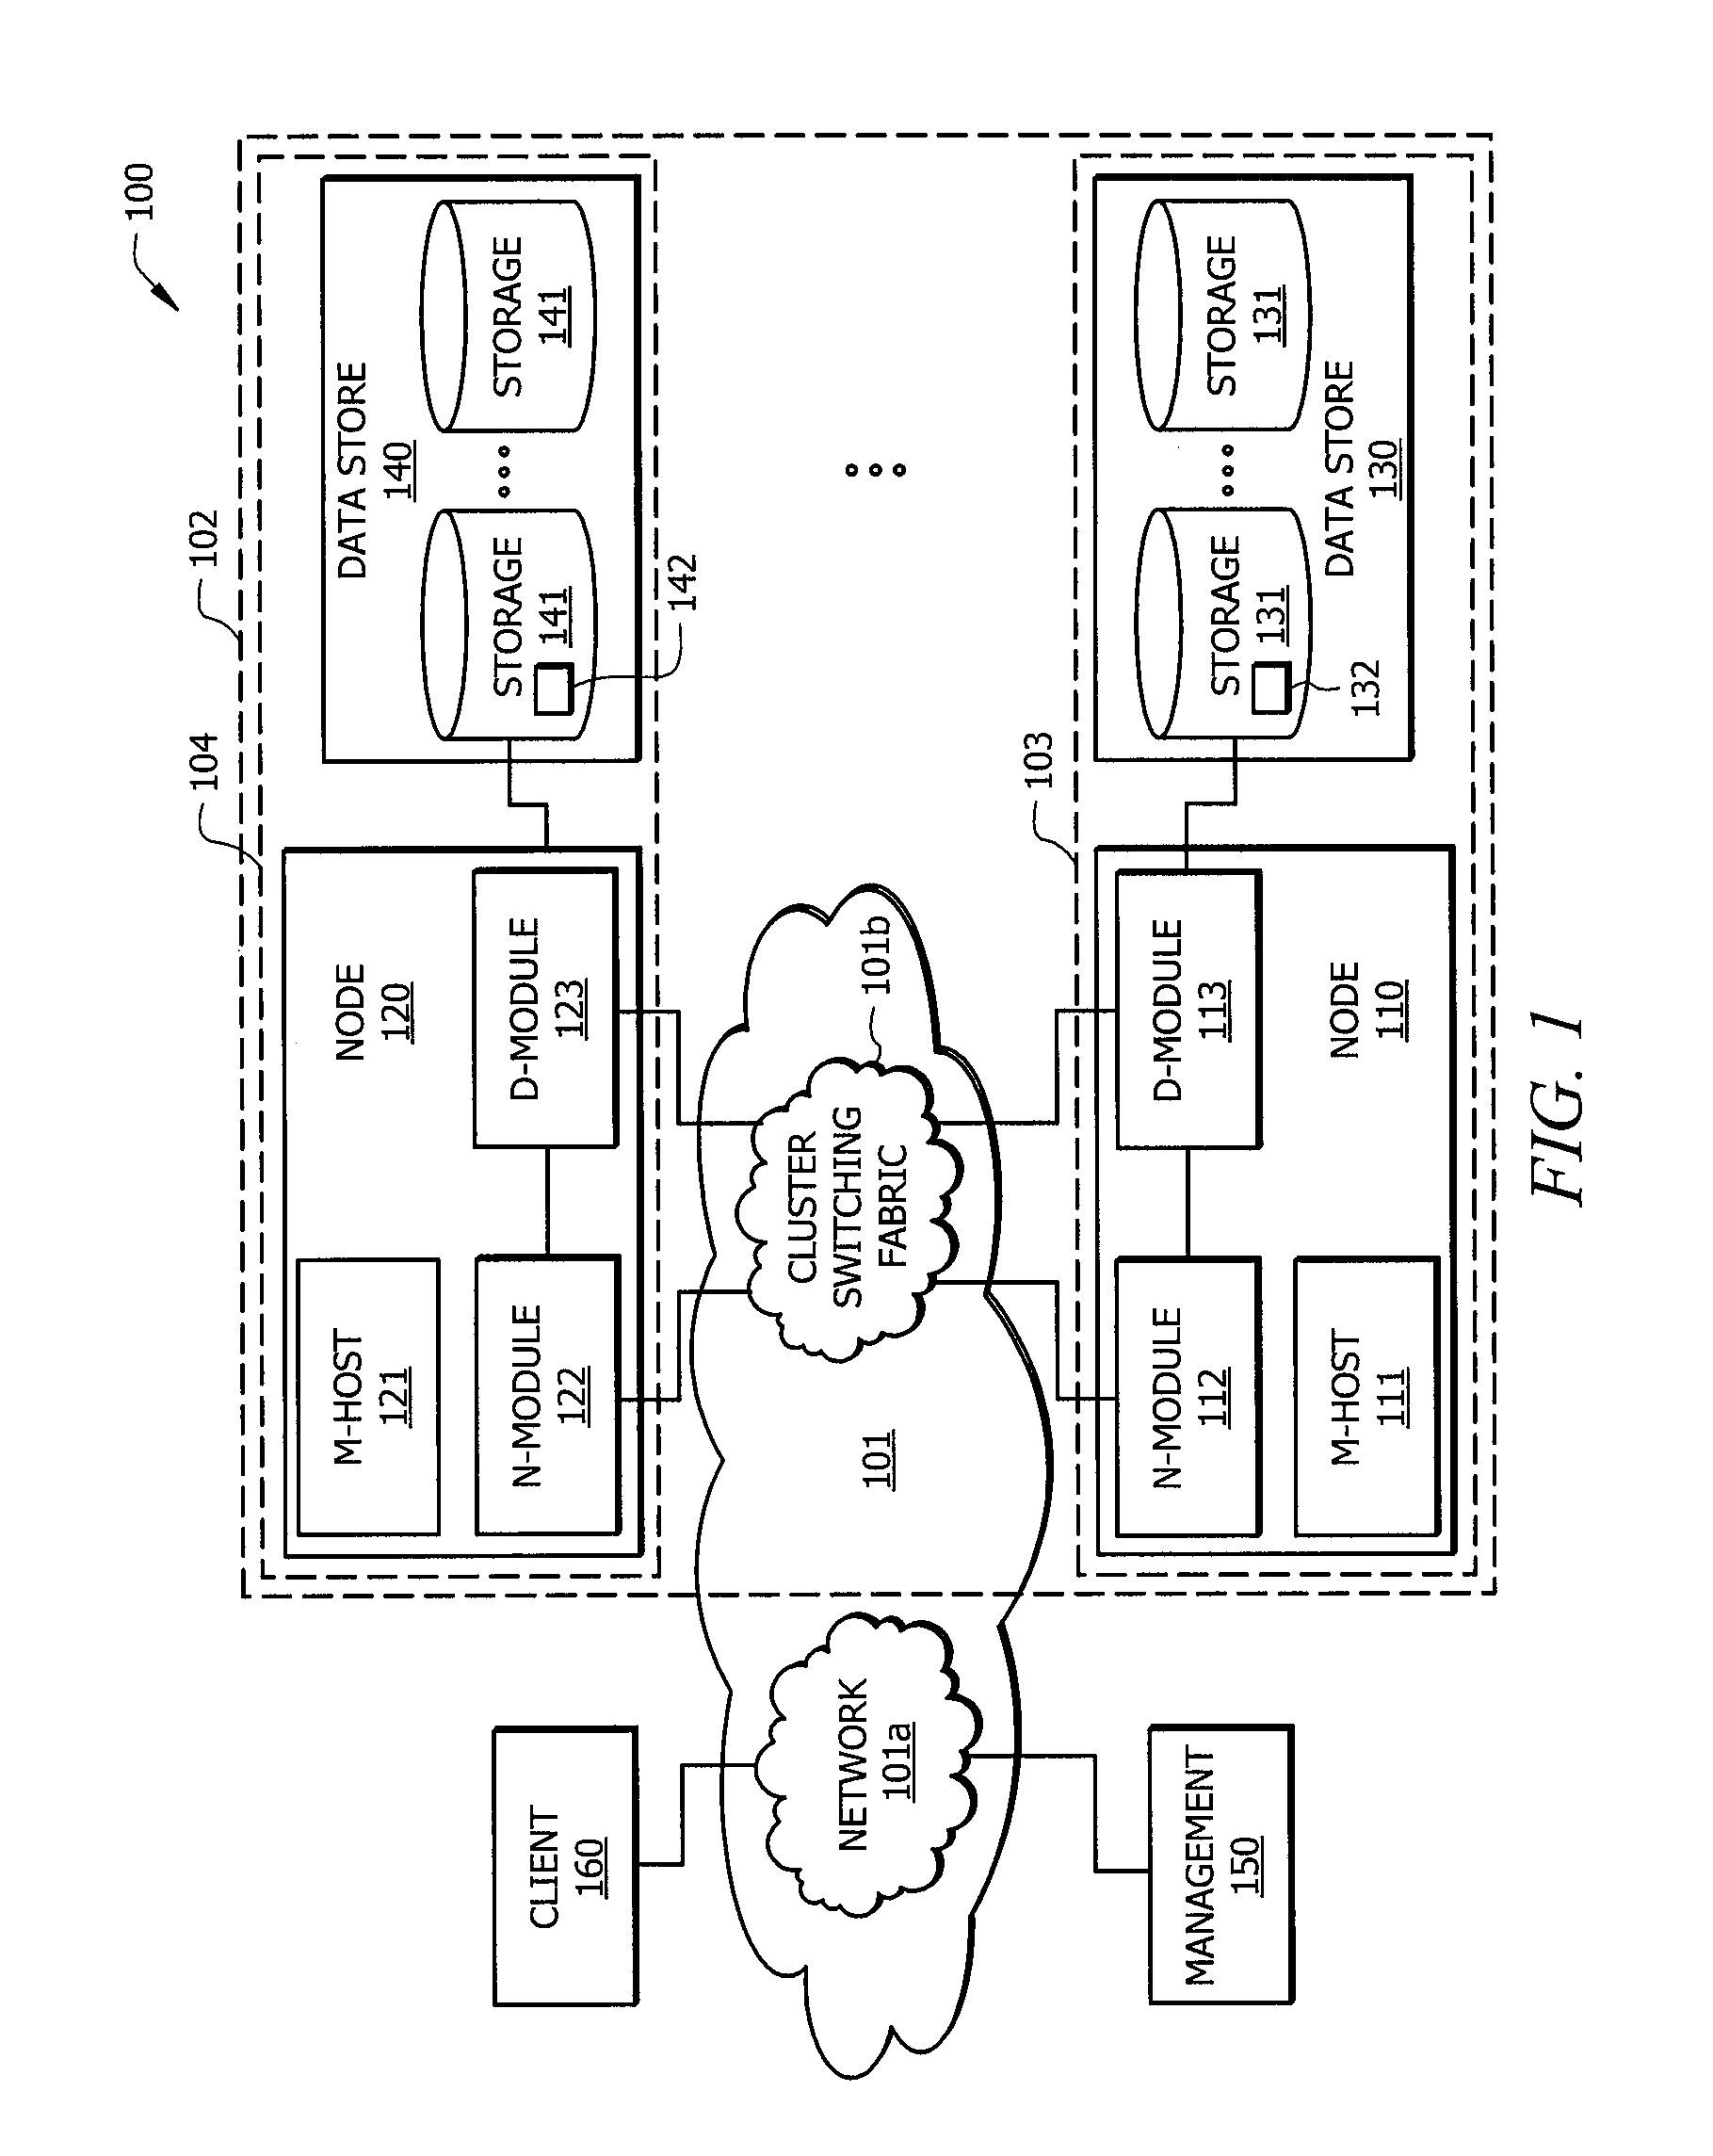 Systems and methods providing mount catalogs for rapid volume mount